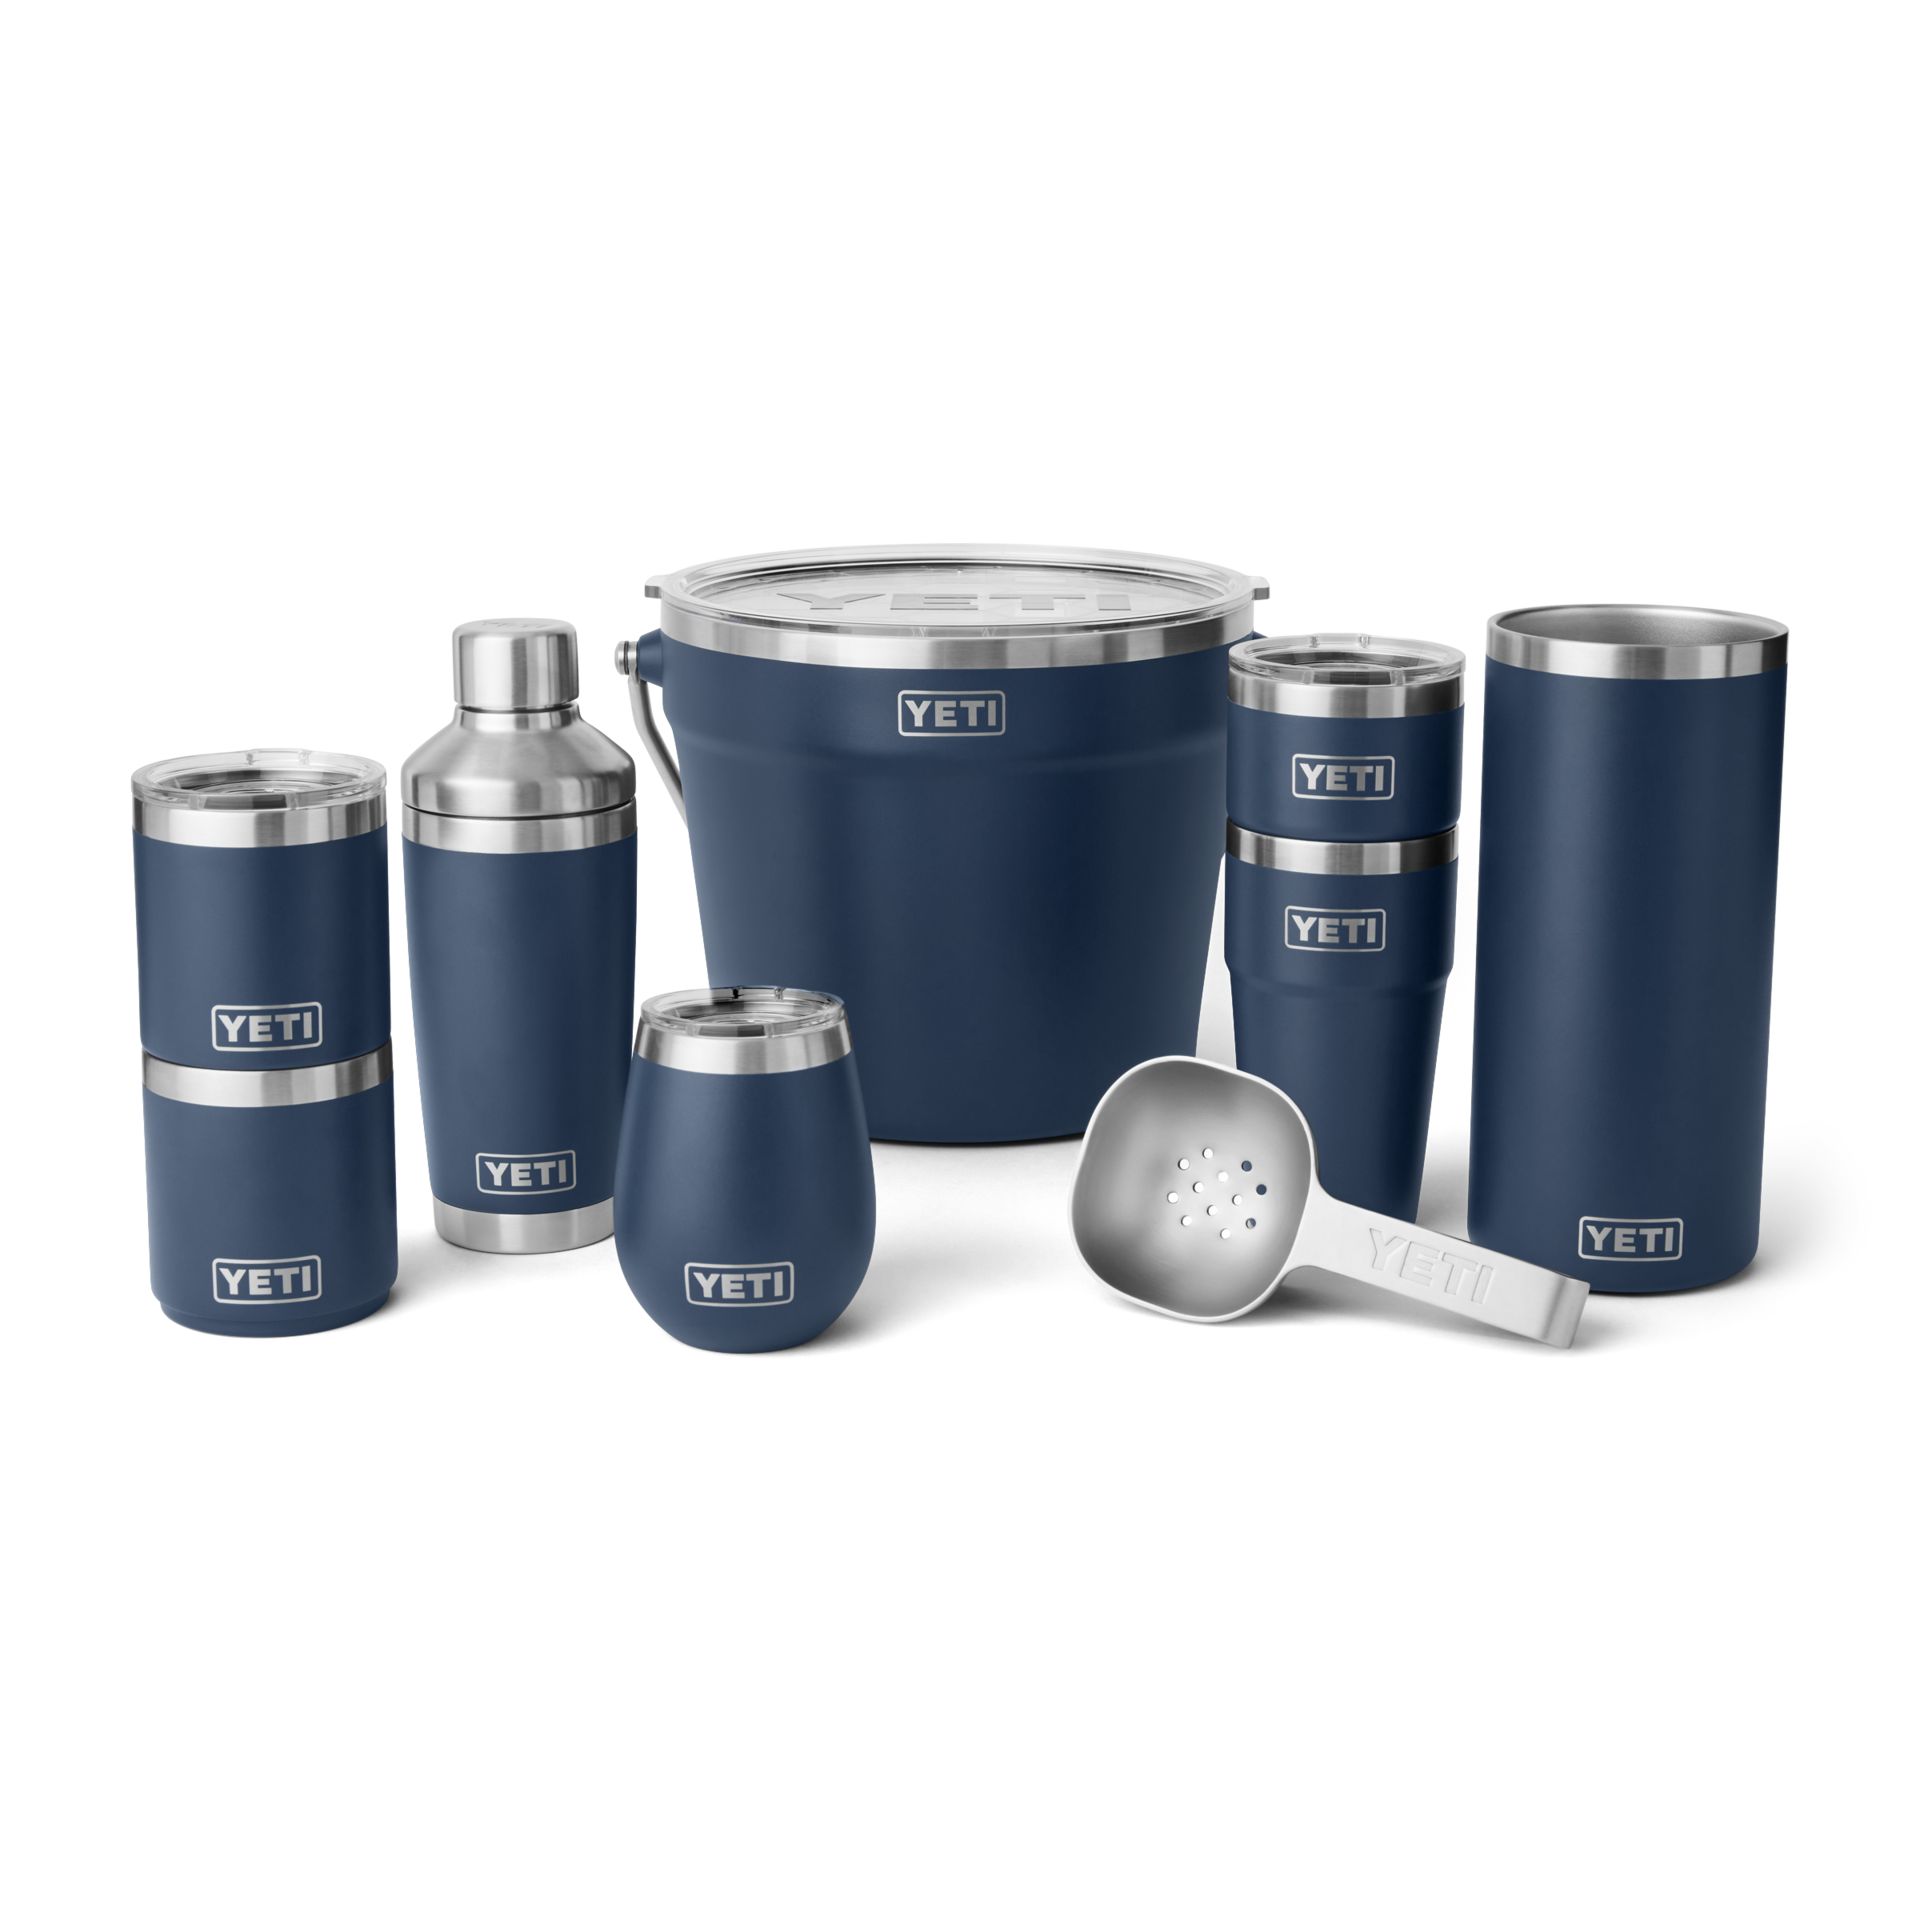 https://media-www.sportchek.ca/product/div-01-hardgoods/dpt-38-hydration/sdpt-14-stainless-steel/333469381/yeti-rambler-10-oz-lowball-with-magslider-lid-04dbd1f7-d83c-46c3-9a09-8f3e98ff942c-jpgrendition.jpg?imdensity=1&imwidth=1244&impolicy=mZoom